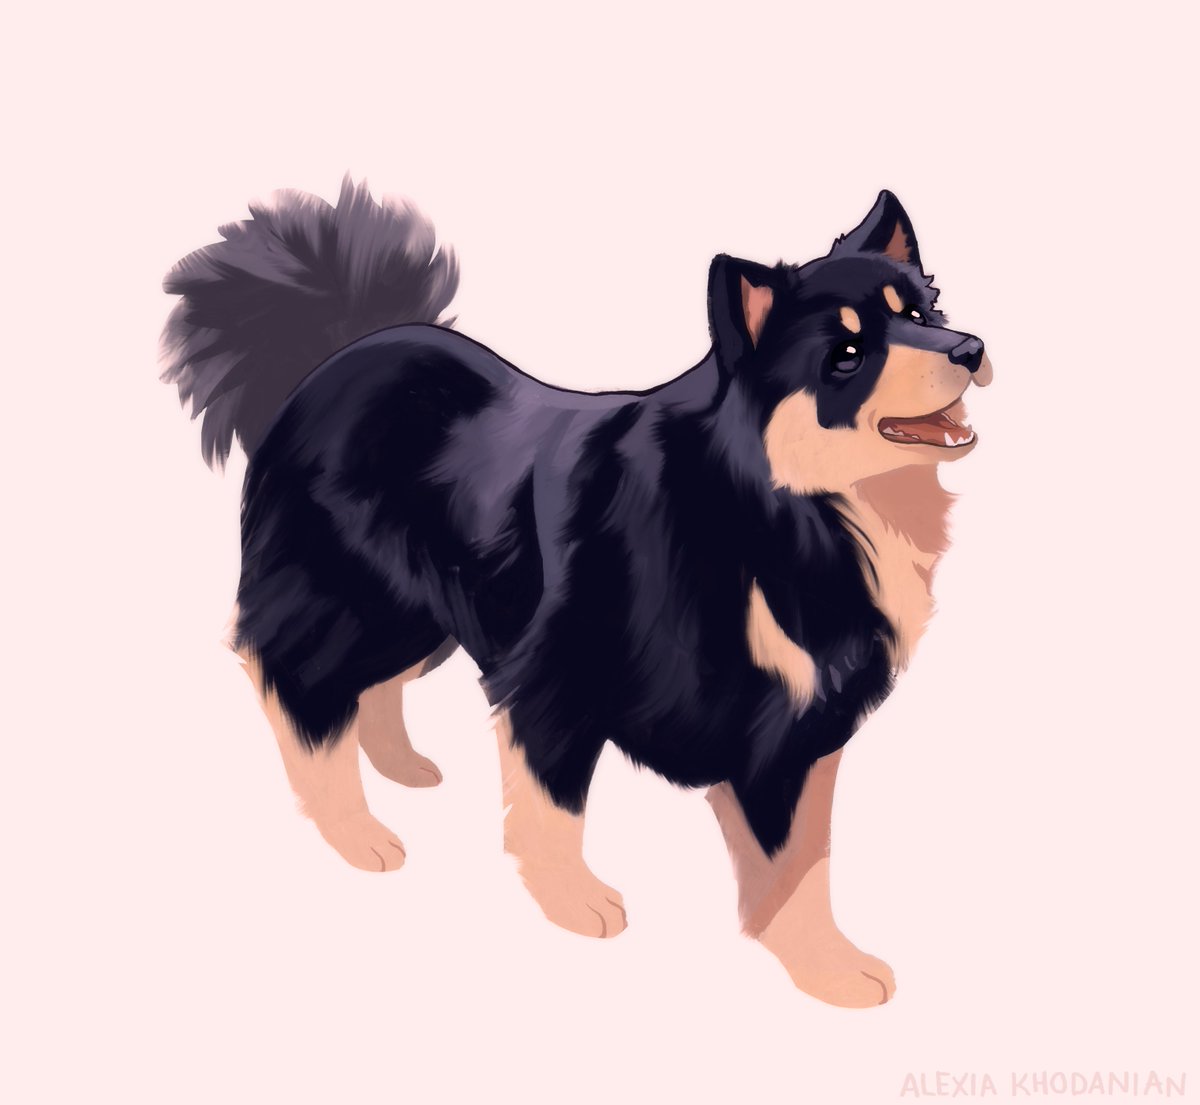  #doggust day 6 Finnish Lapphund !! look at that fluffy little guy!